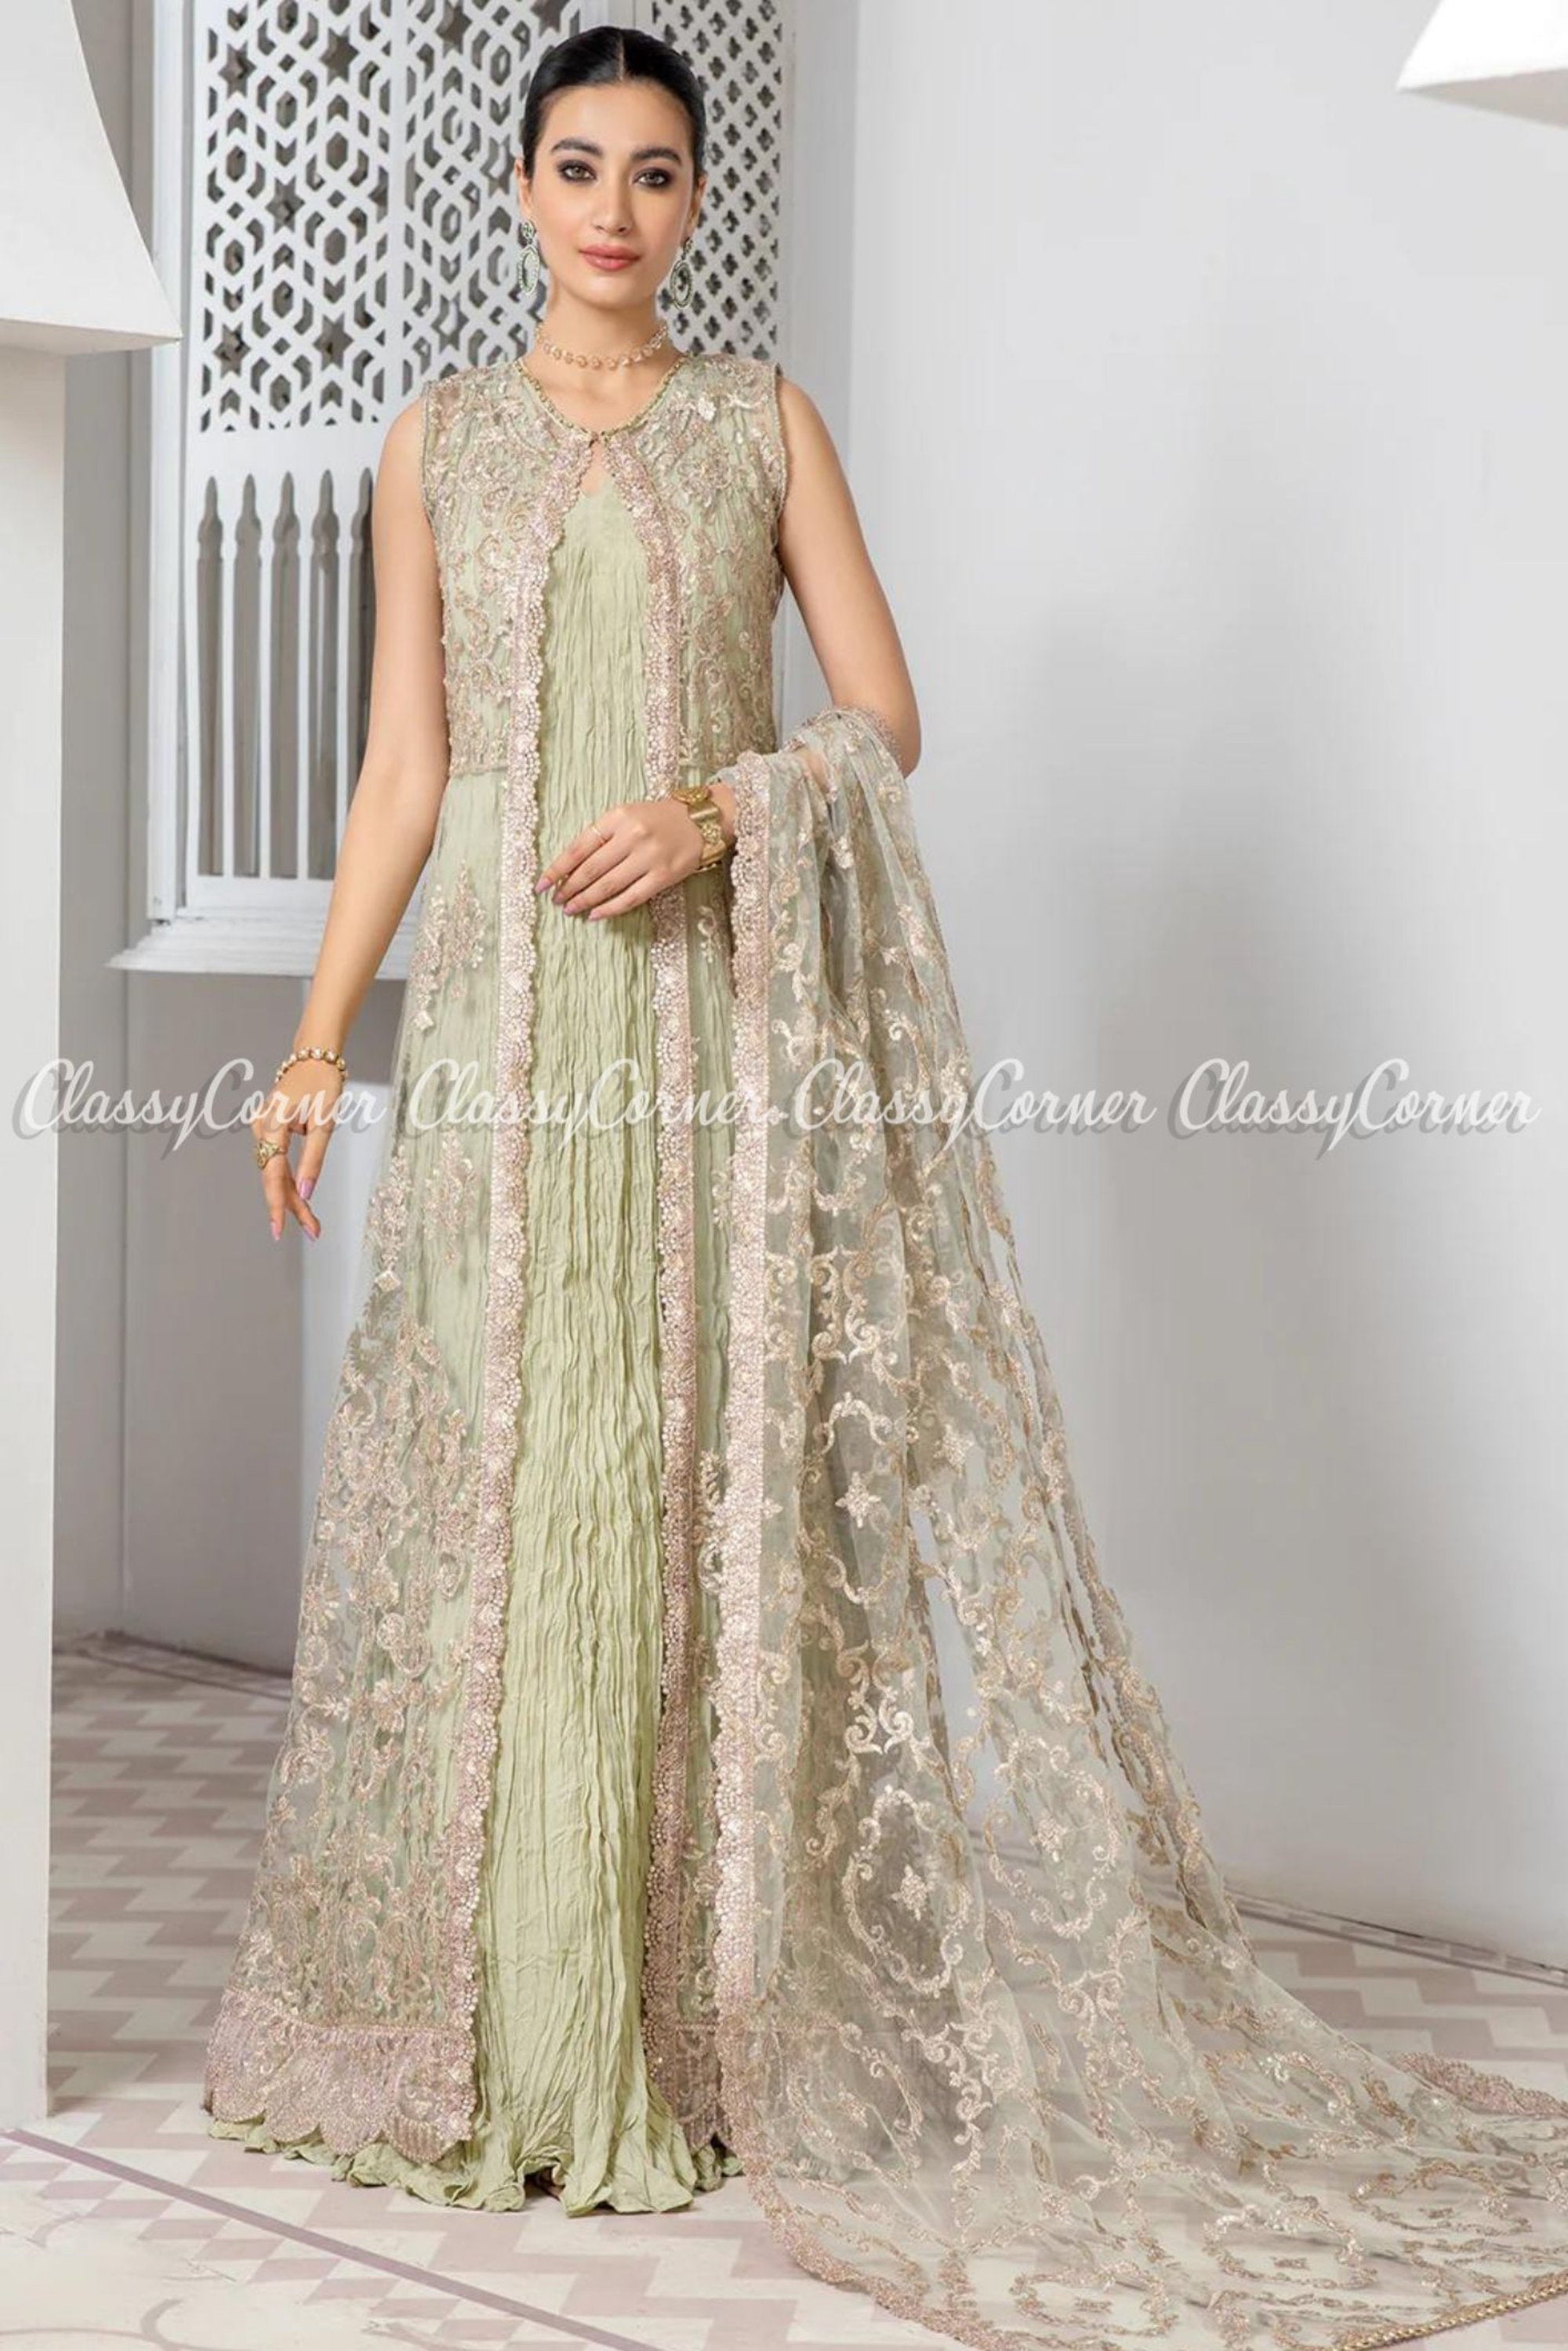 Pakistani Mint Green Golden Net Embroidered Gown Outfits - Classy Corner